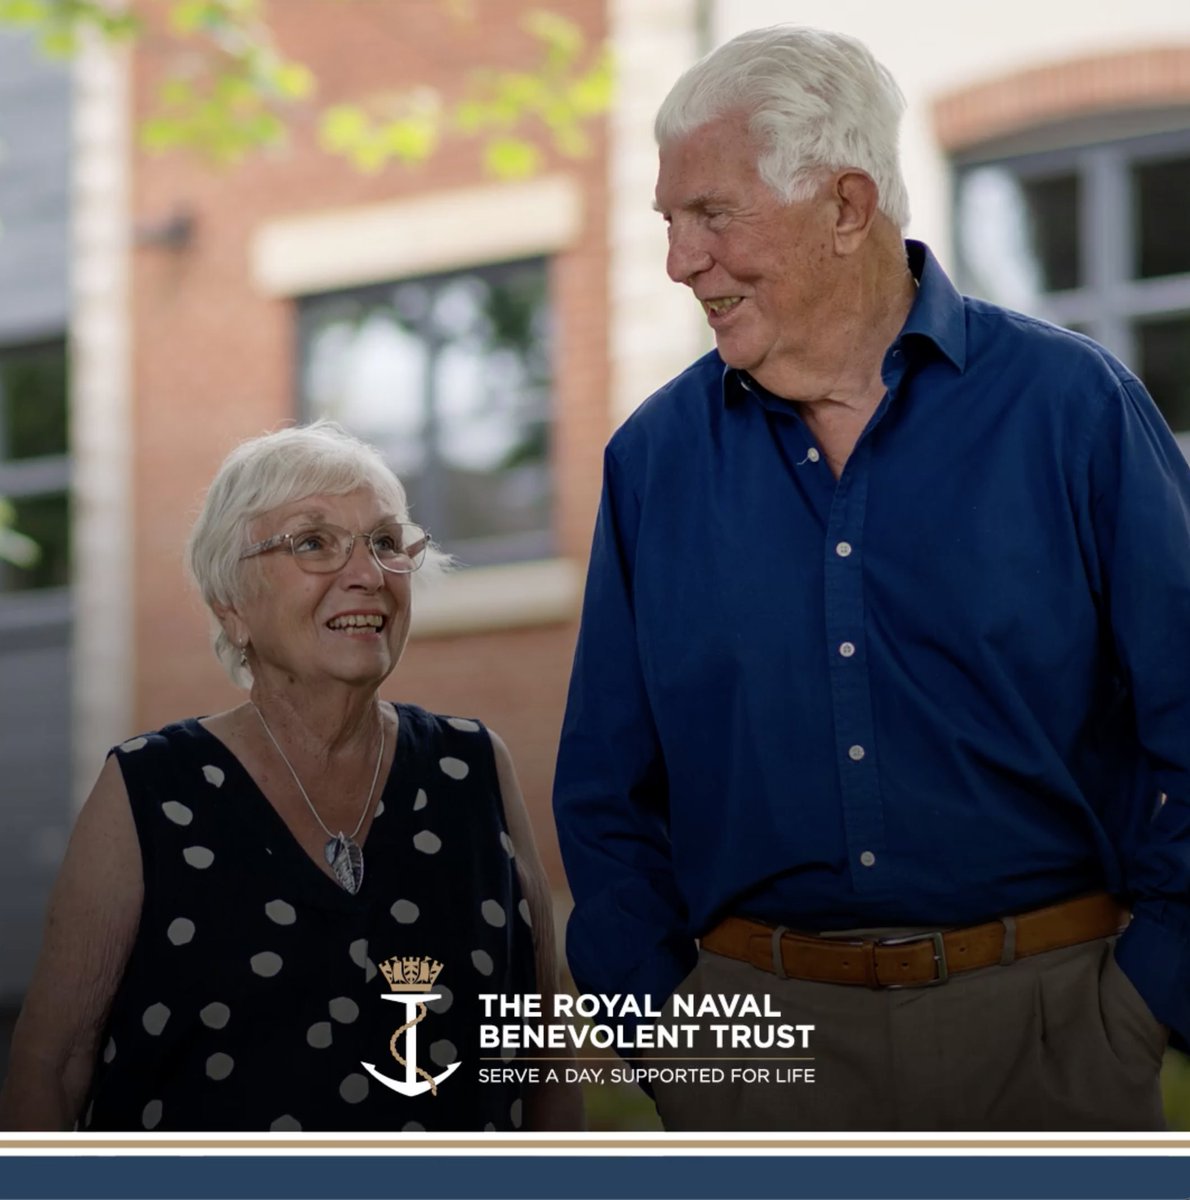 Our superb veteran care and nursing homes offer support for a variety of care needs. Our resident-focused approach puts respect, care & camaraderie at the heart of everything we do. Discover more: bit.ly/477ZTc7 #RoyalNavy #RoyalMarines